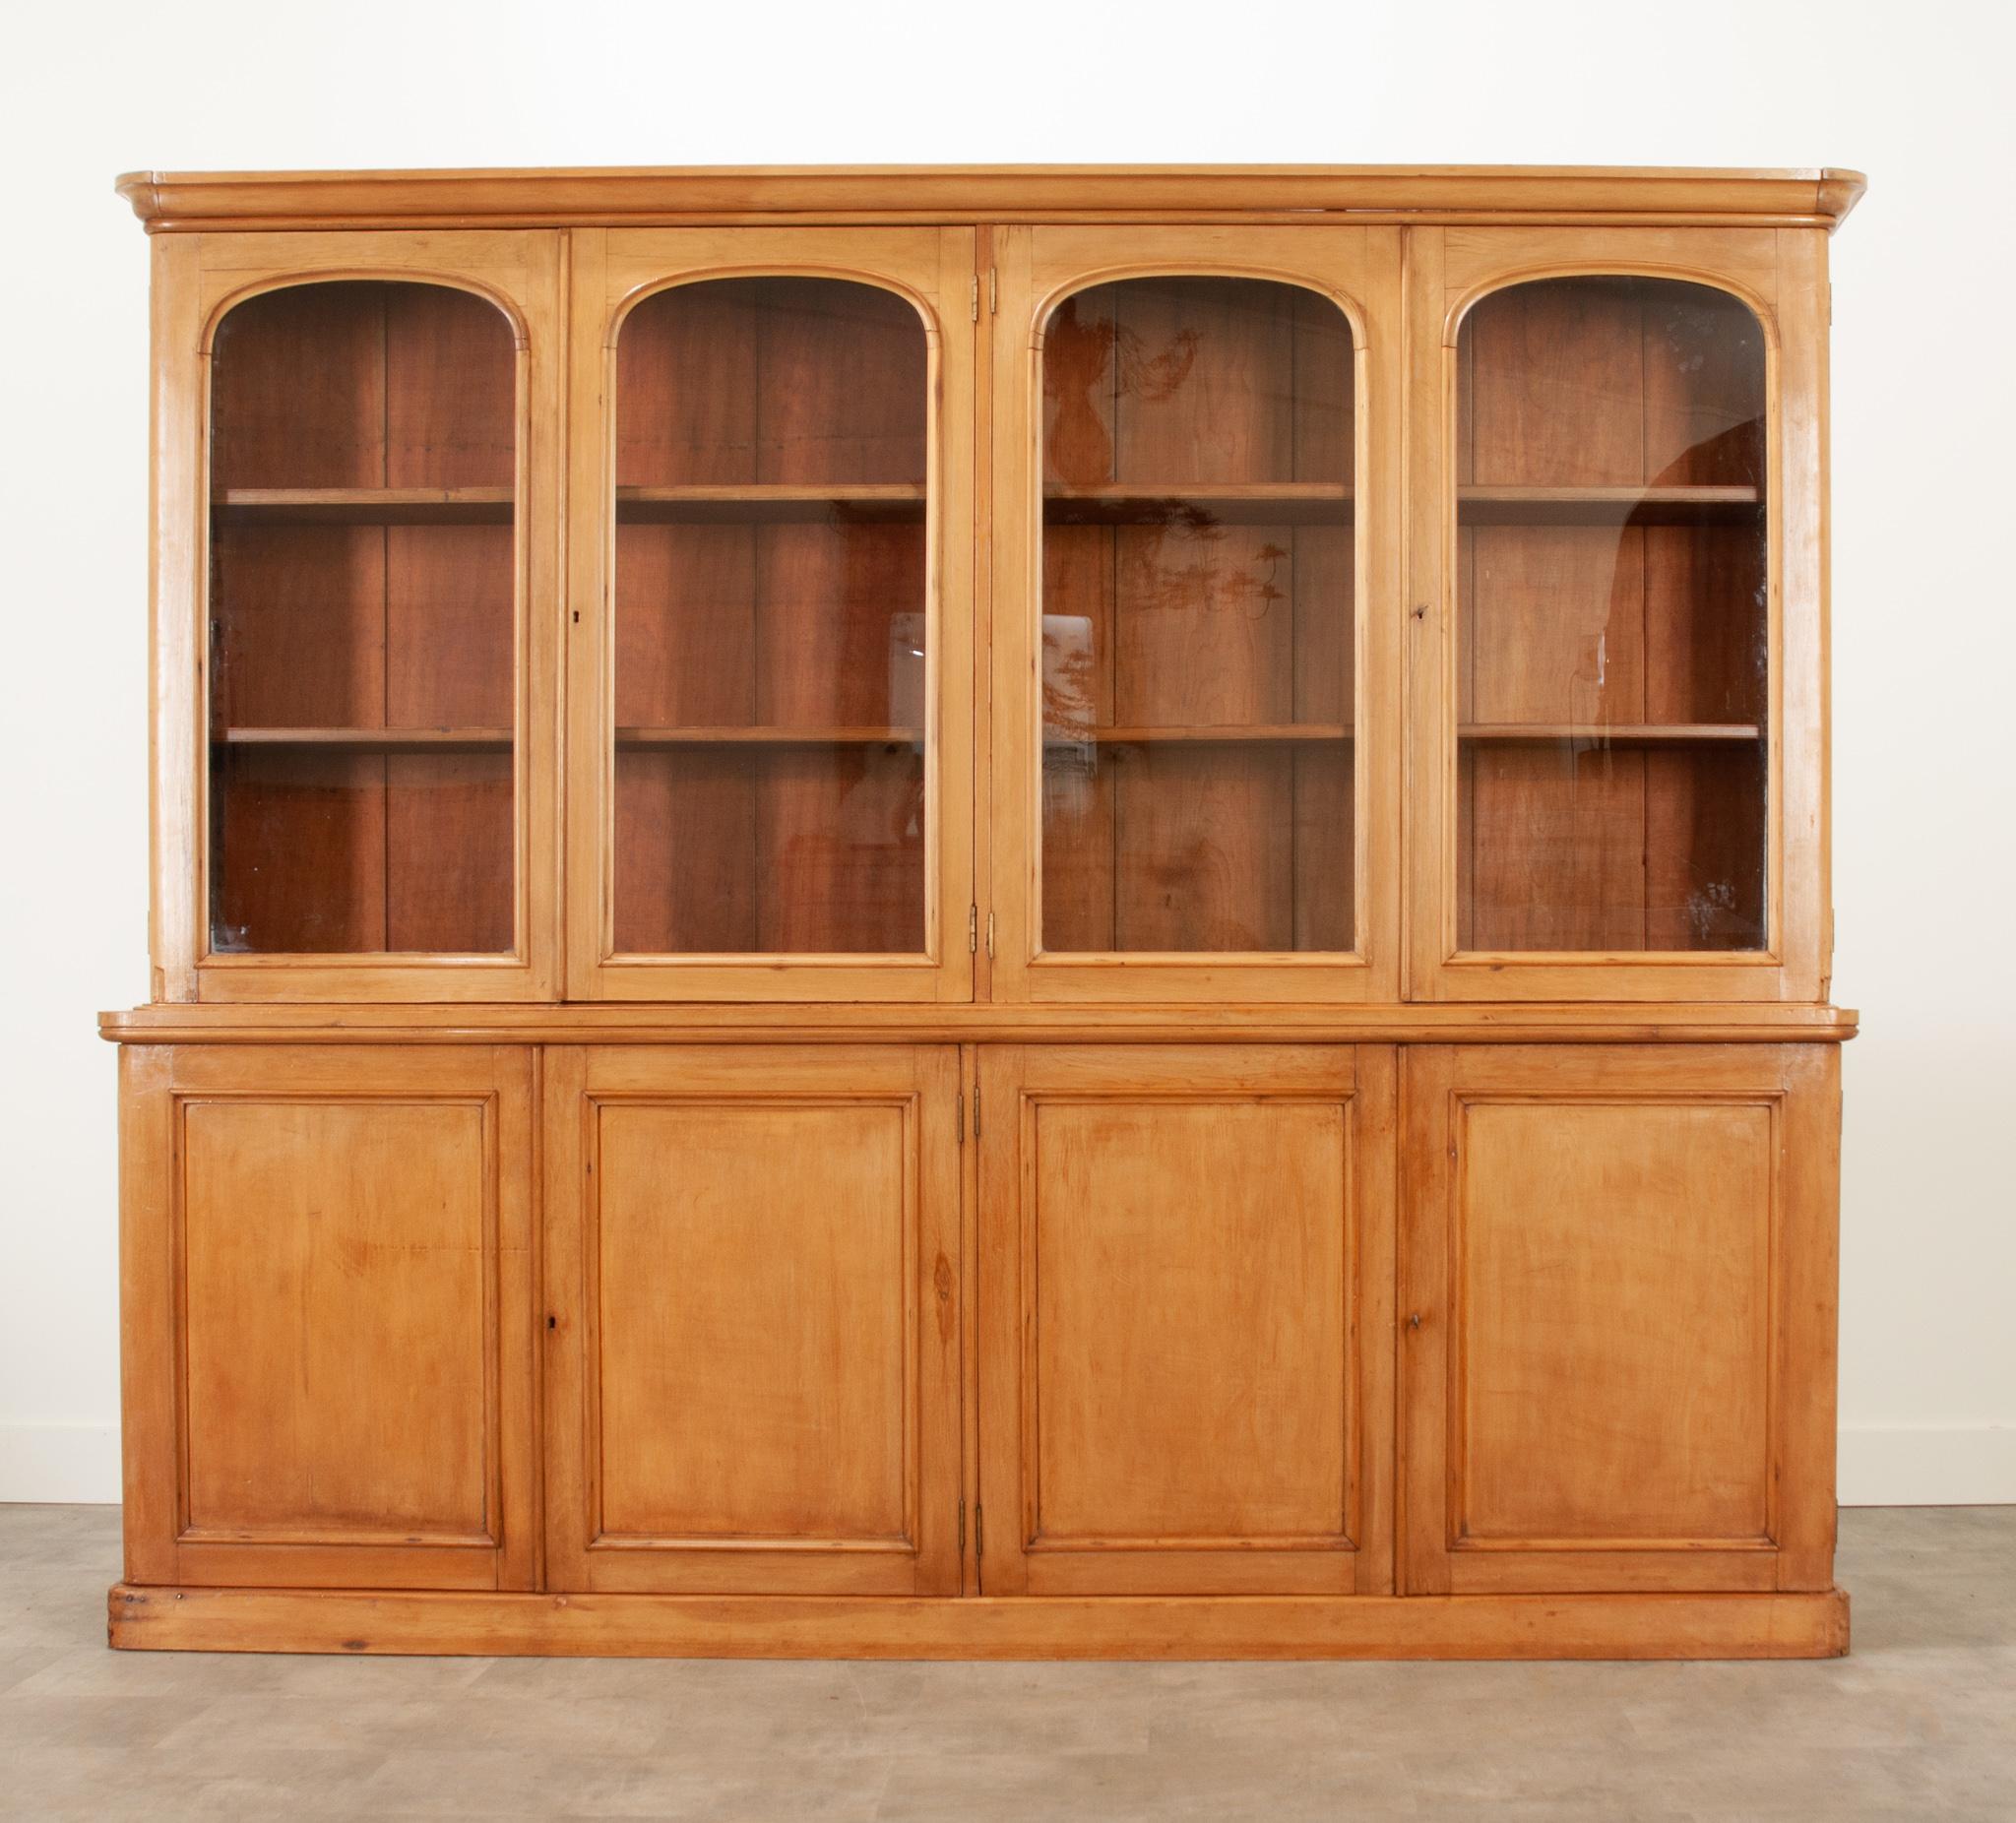 A sizable pine bibliotheque crafted in France circa 1860. The four arched glass front, locking and latching upper doors close before two saw-tooth adjustable shelves diverge in the center of the piece. Four lower doors close before two separate